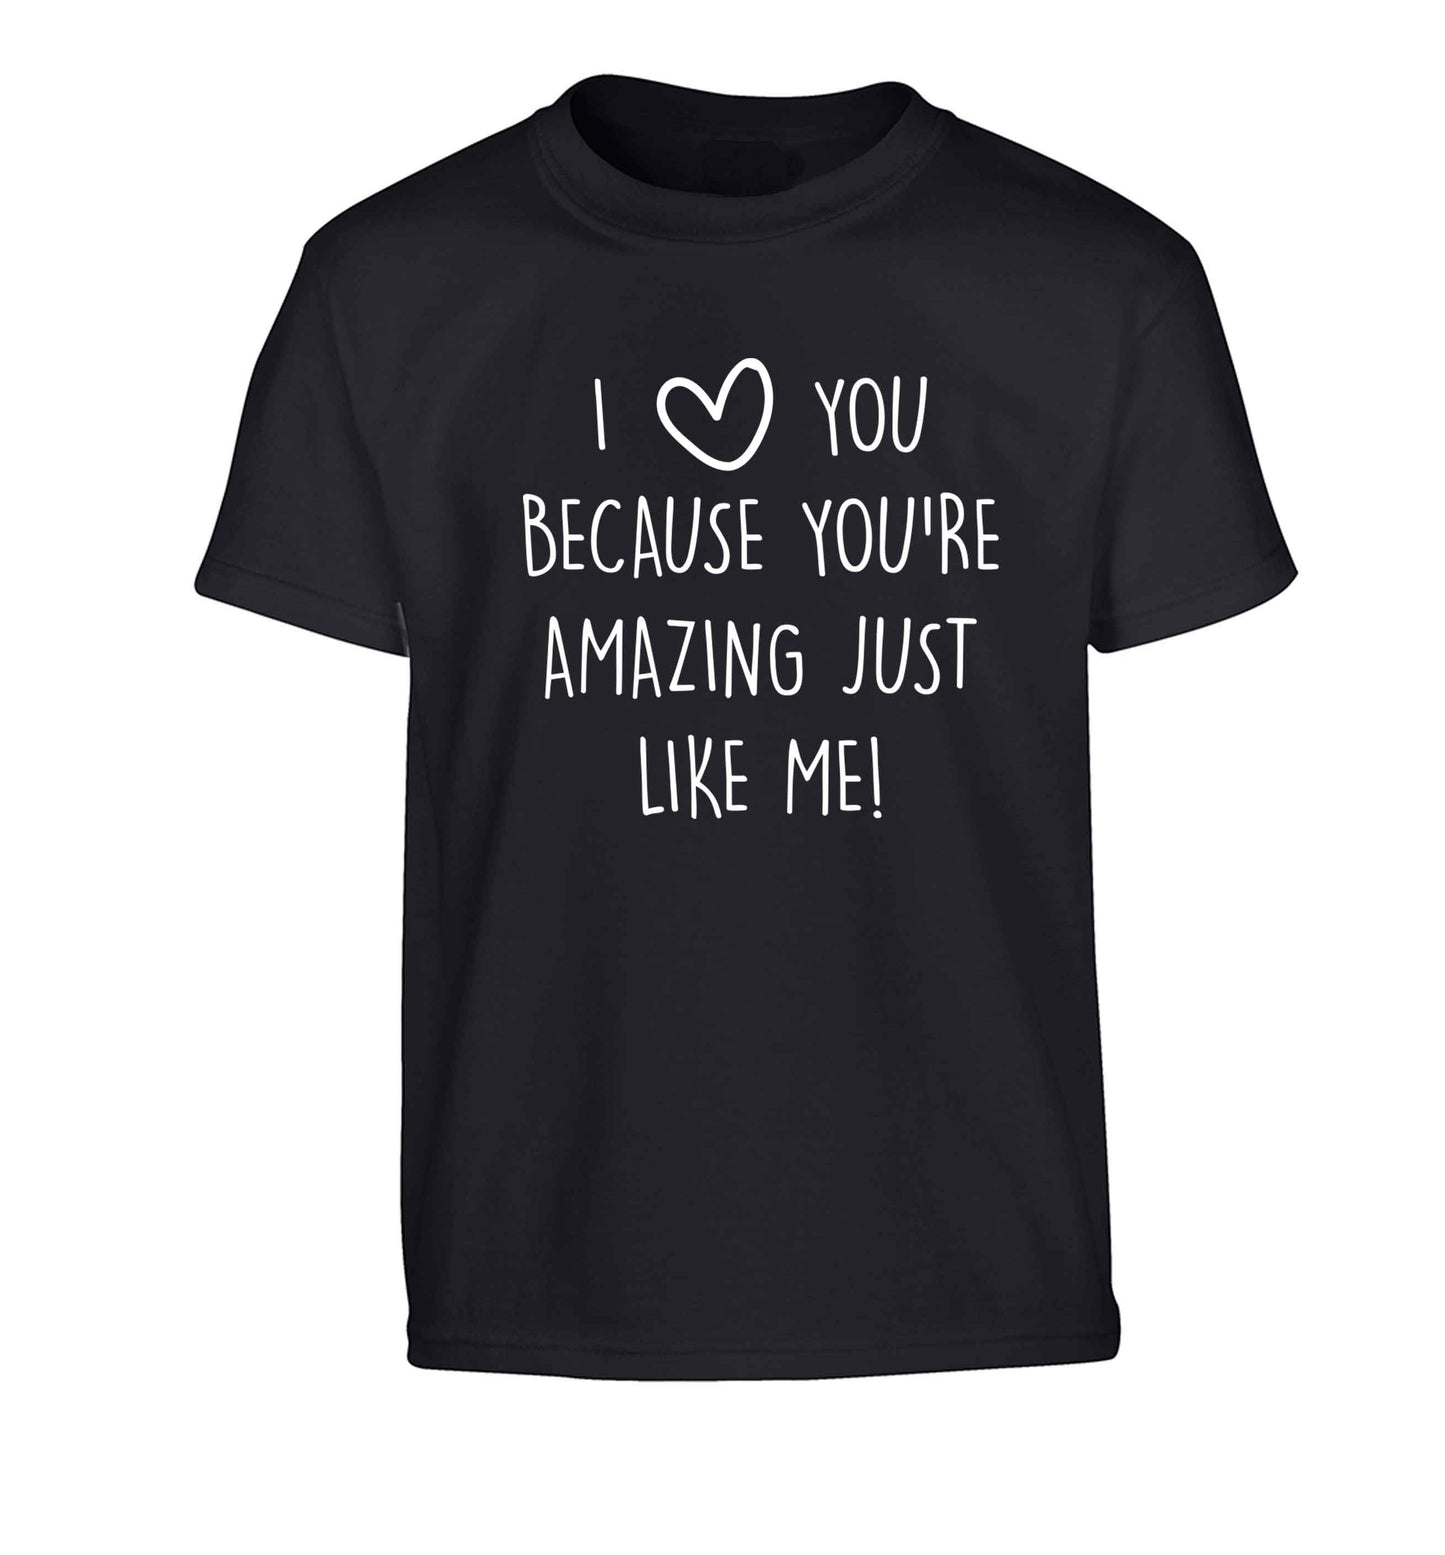 I love you because you're amazing just like me Children's black Tshirt 12-13 Years